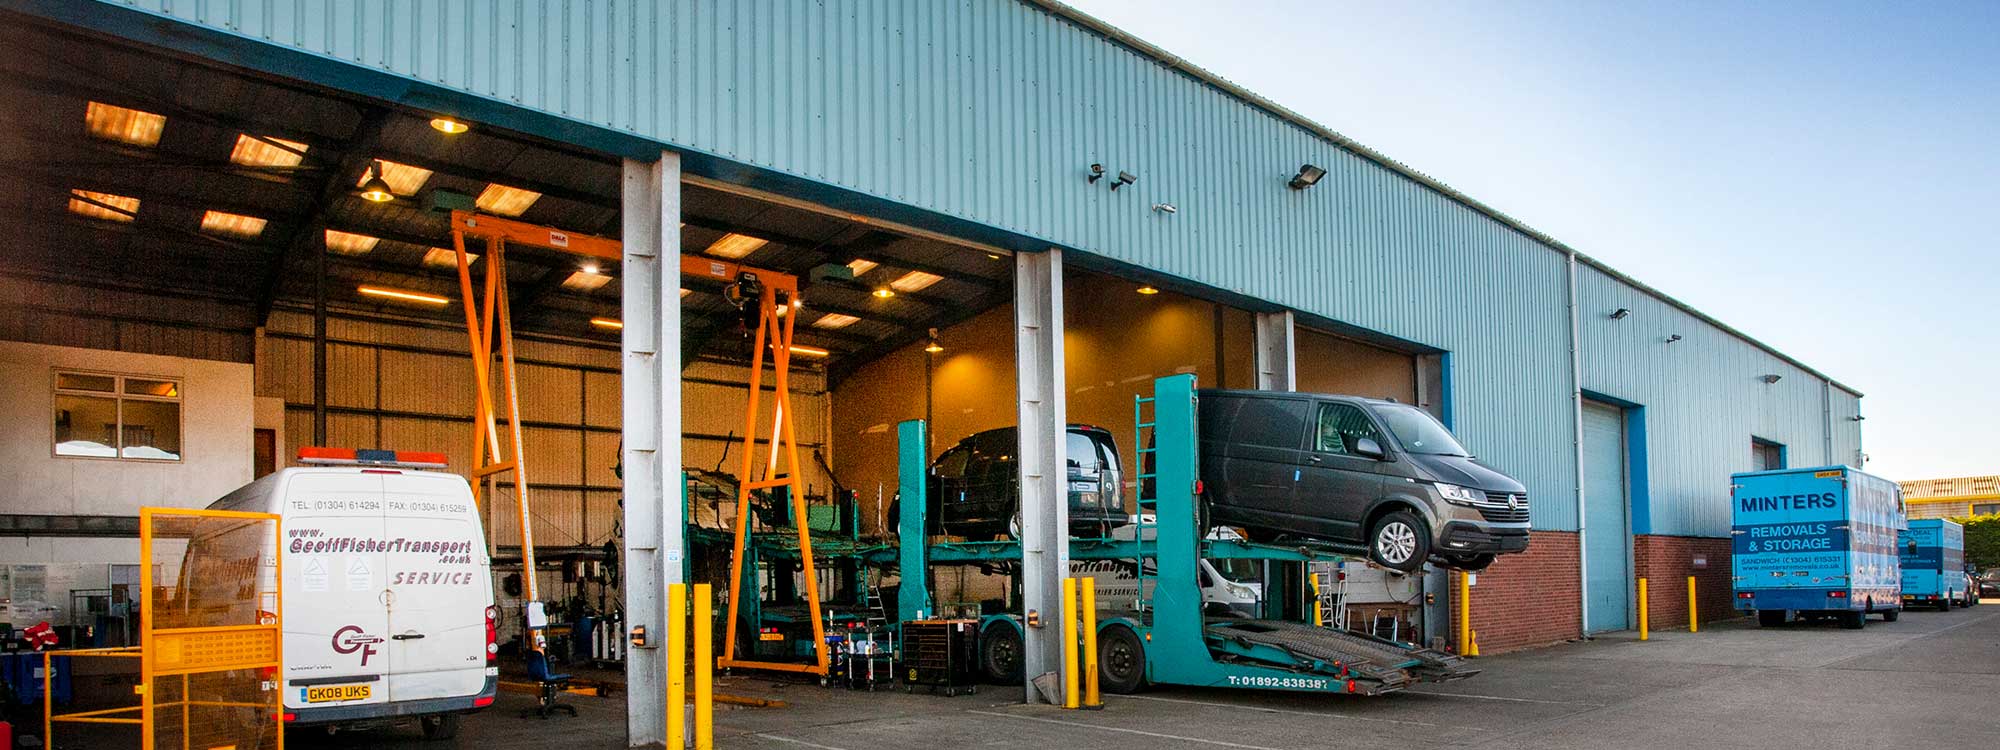 Image of the Minters of Deal vehicle storage facilities